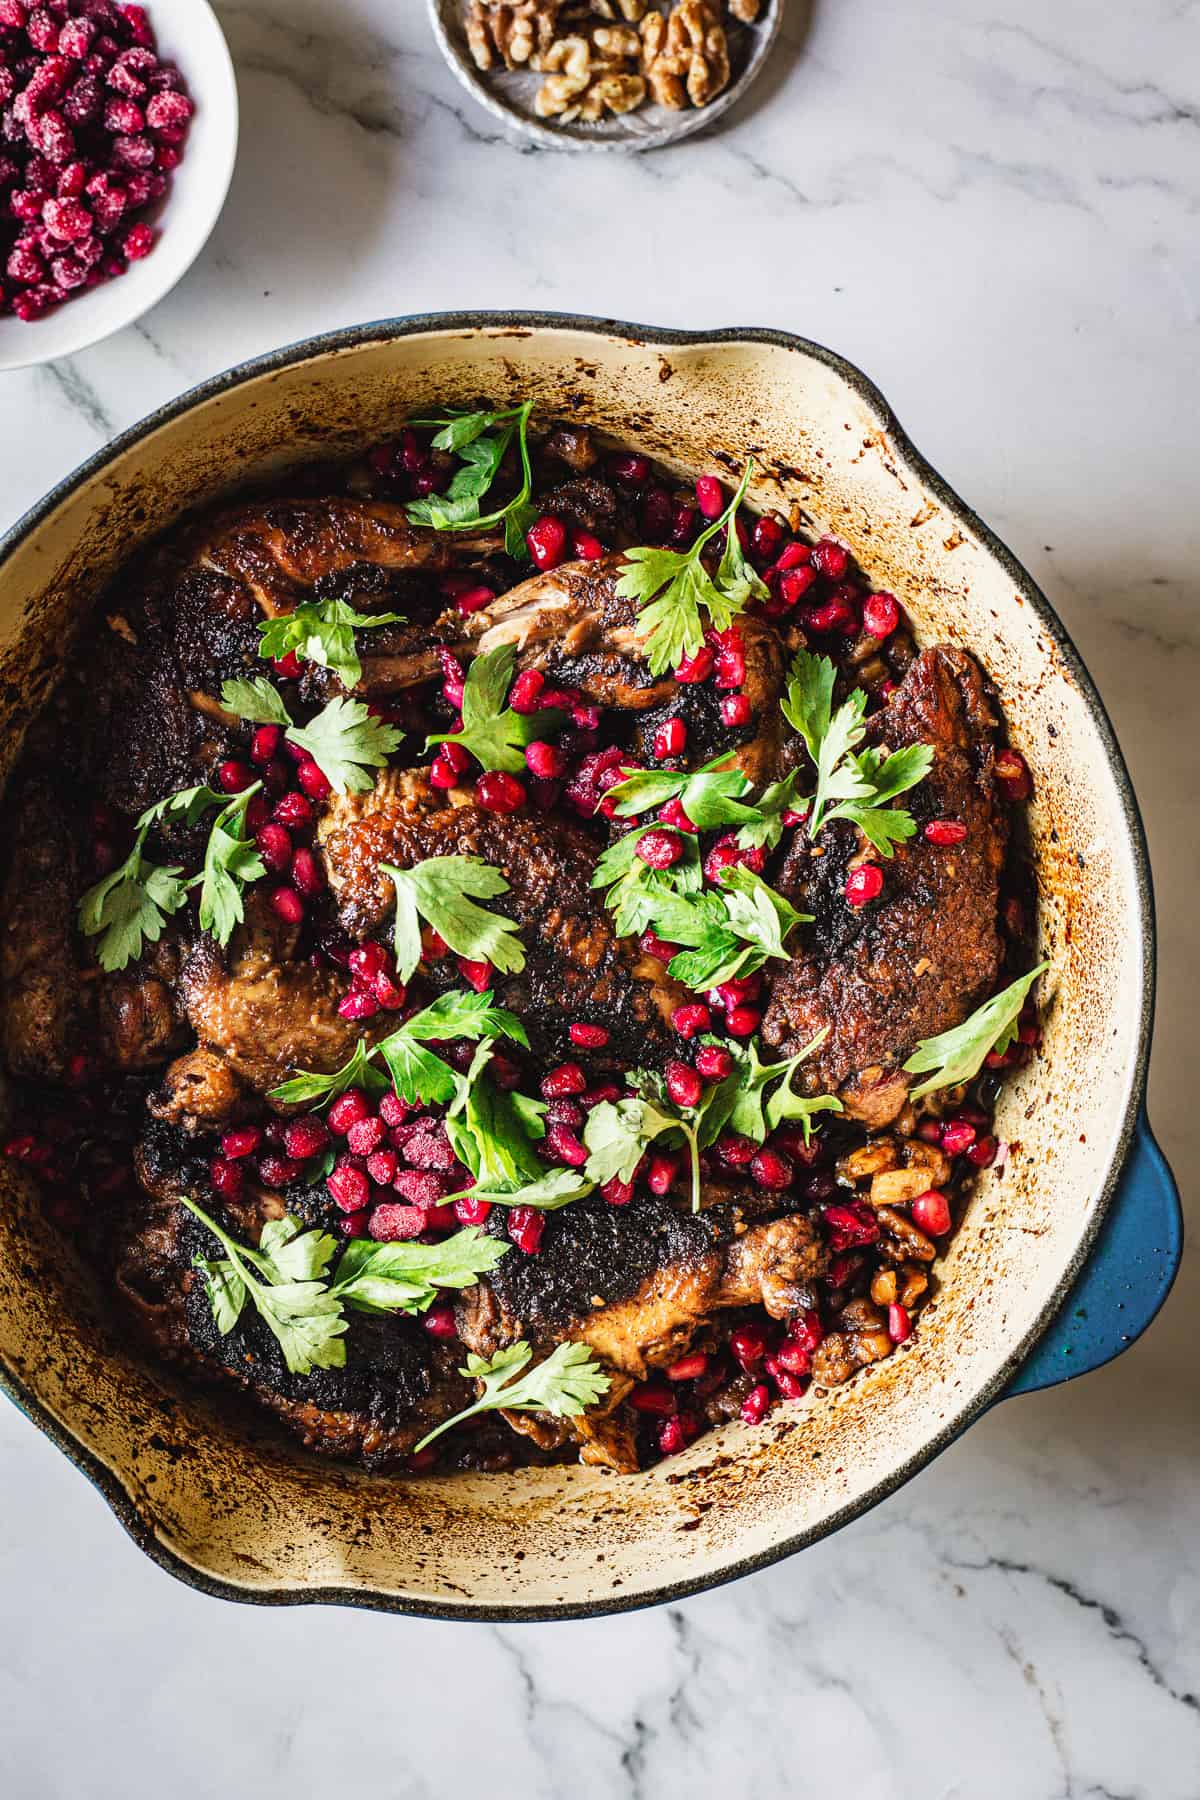 Roasted chicken with pomegranate and pomegranate seeds.